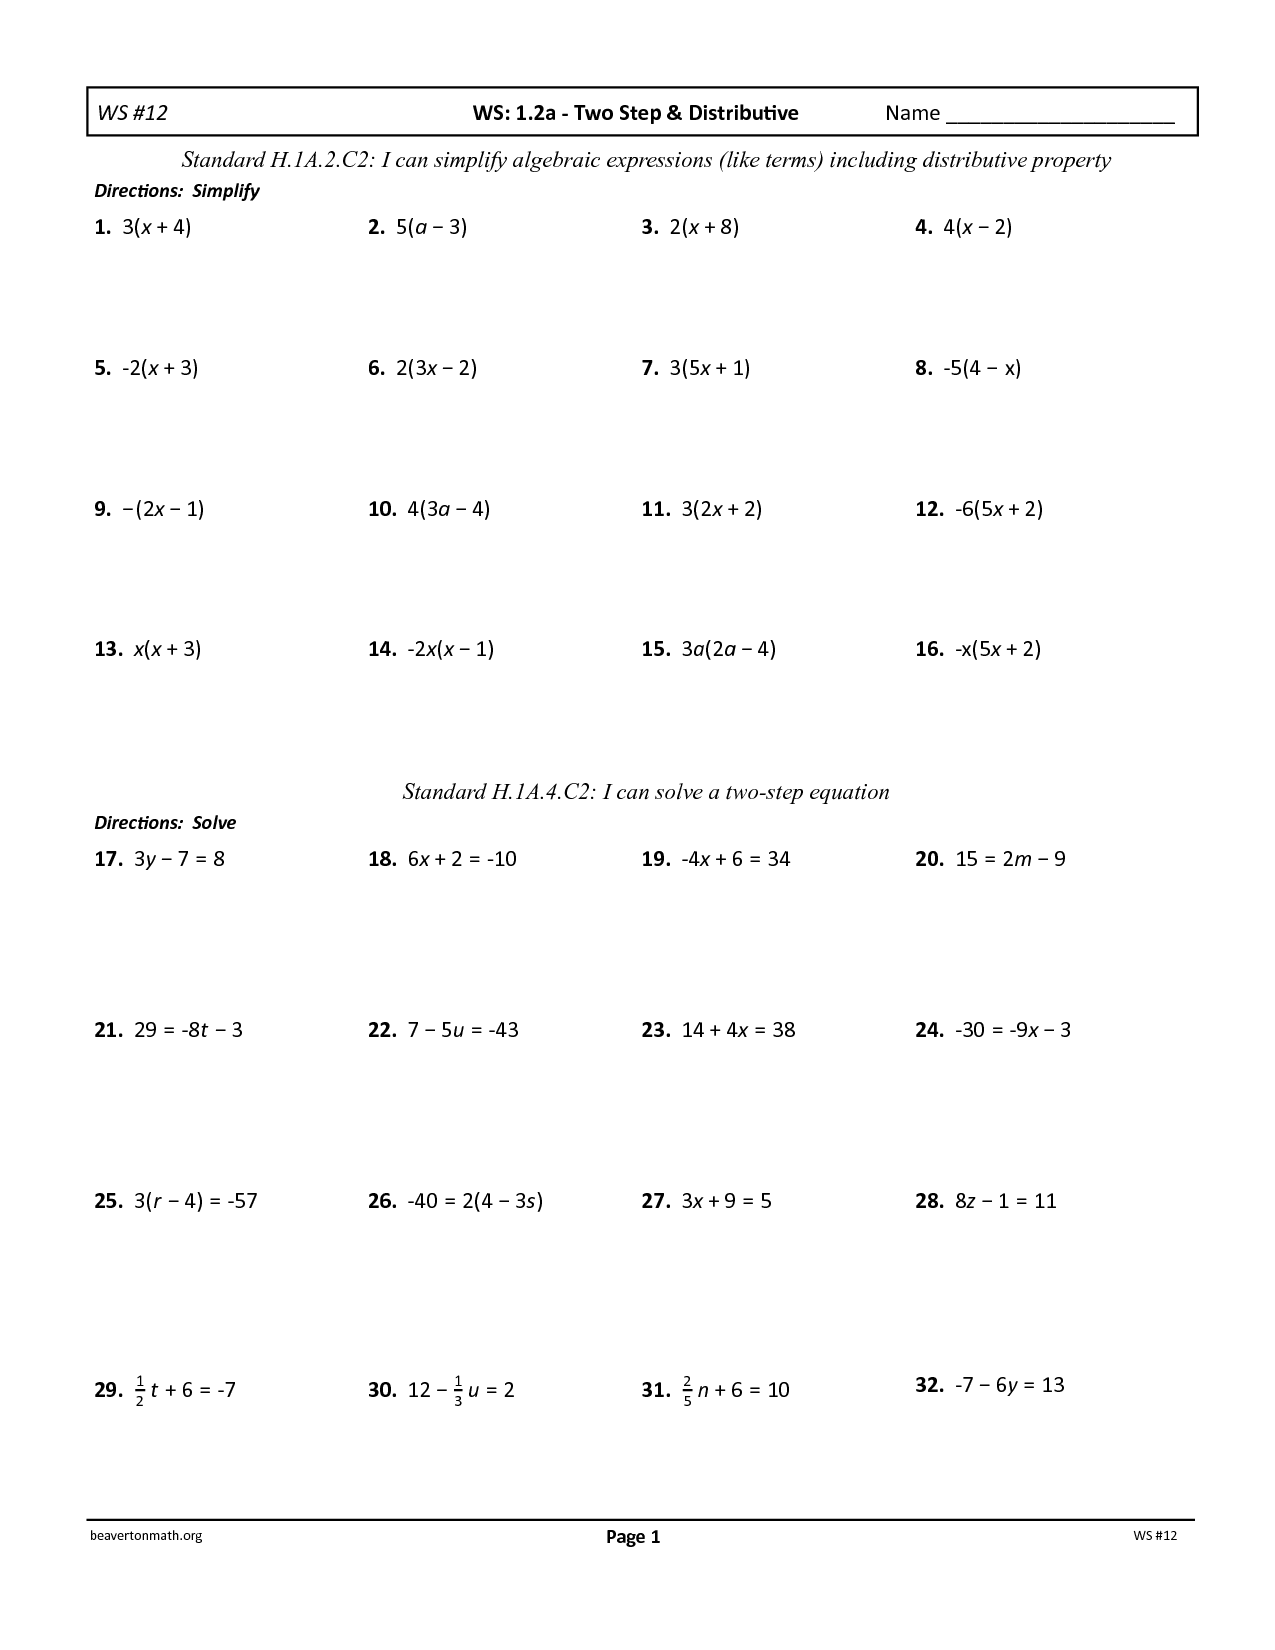 two-step-equations-practice-worksheet-answer-key-inspirearc